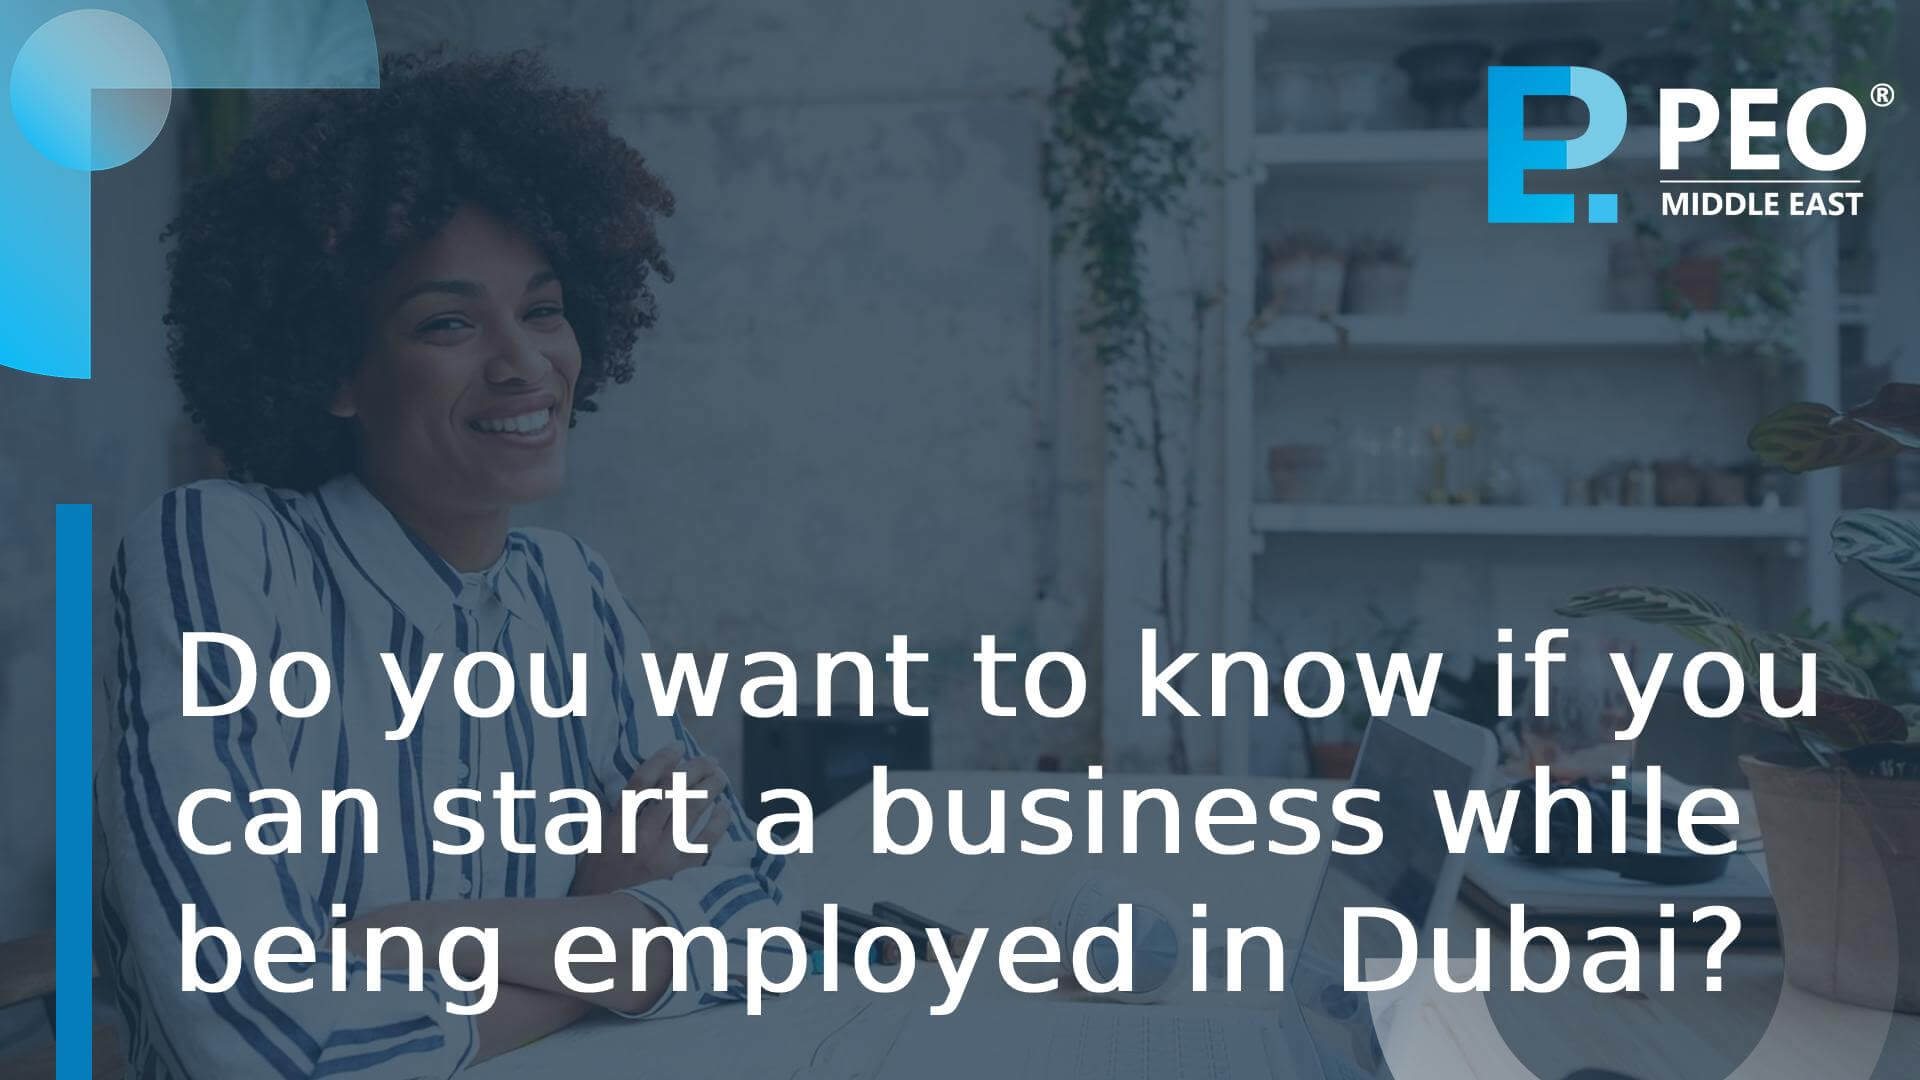 start a business while being employed in Dubai